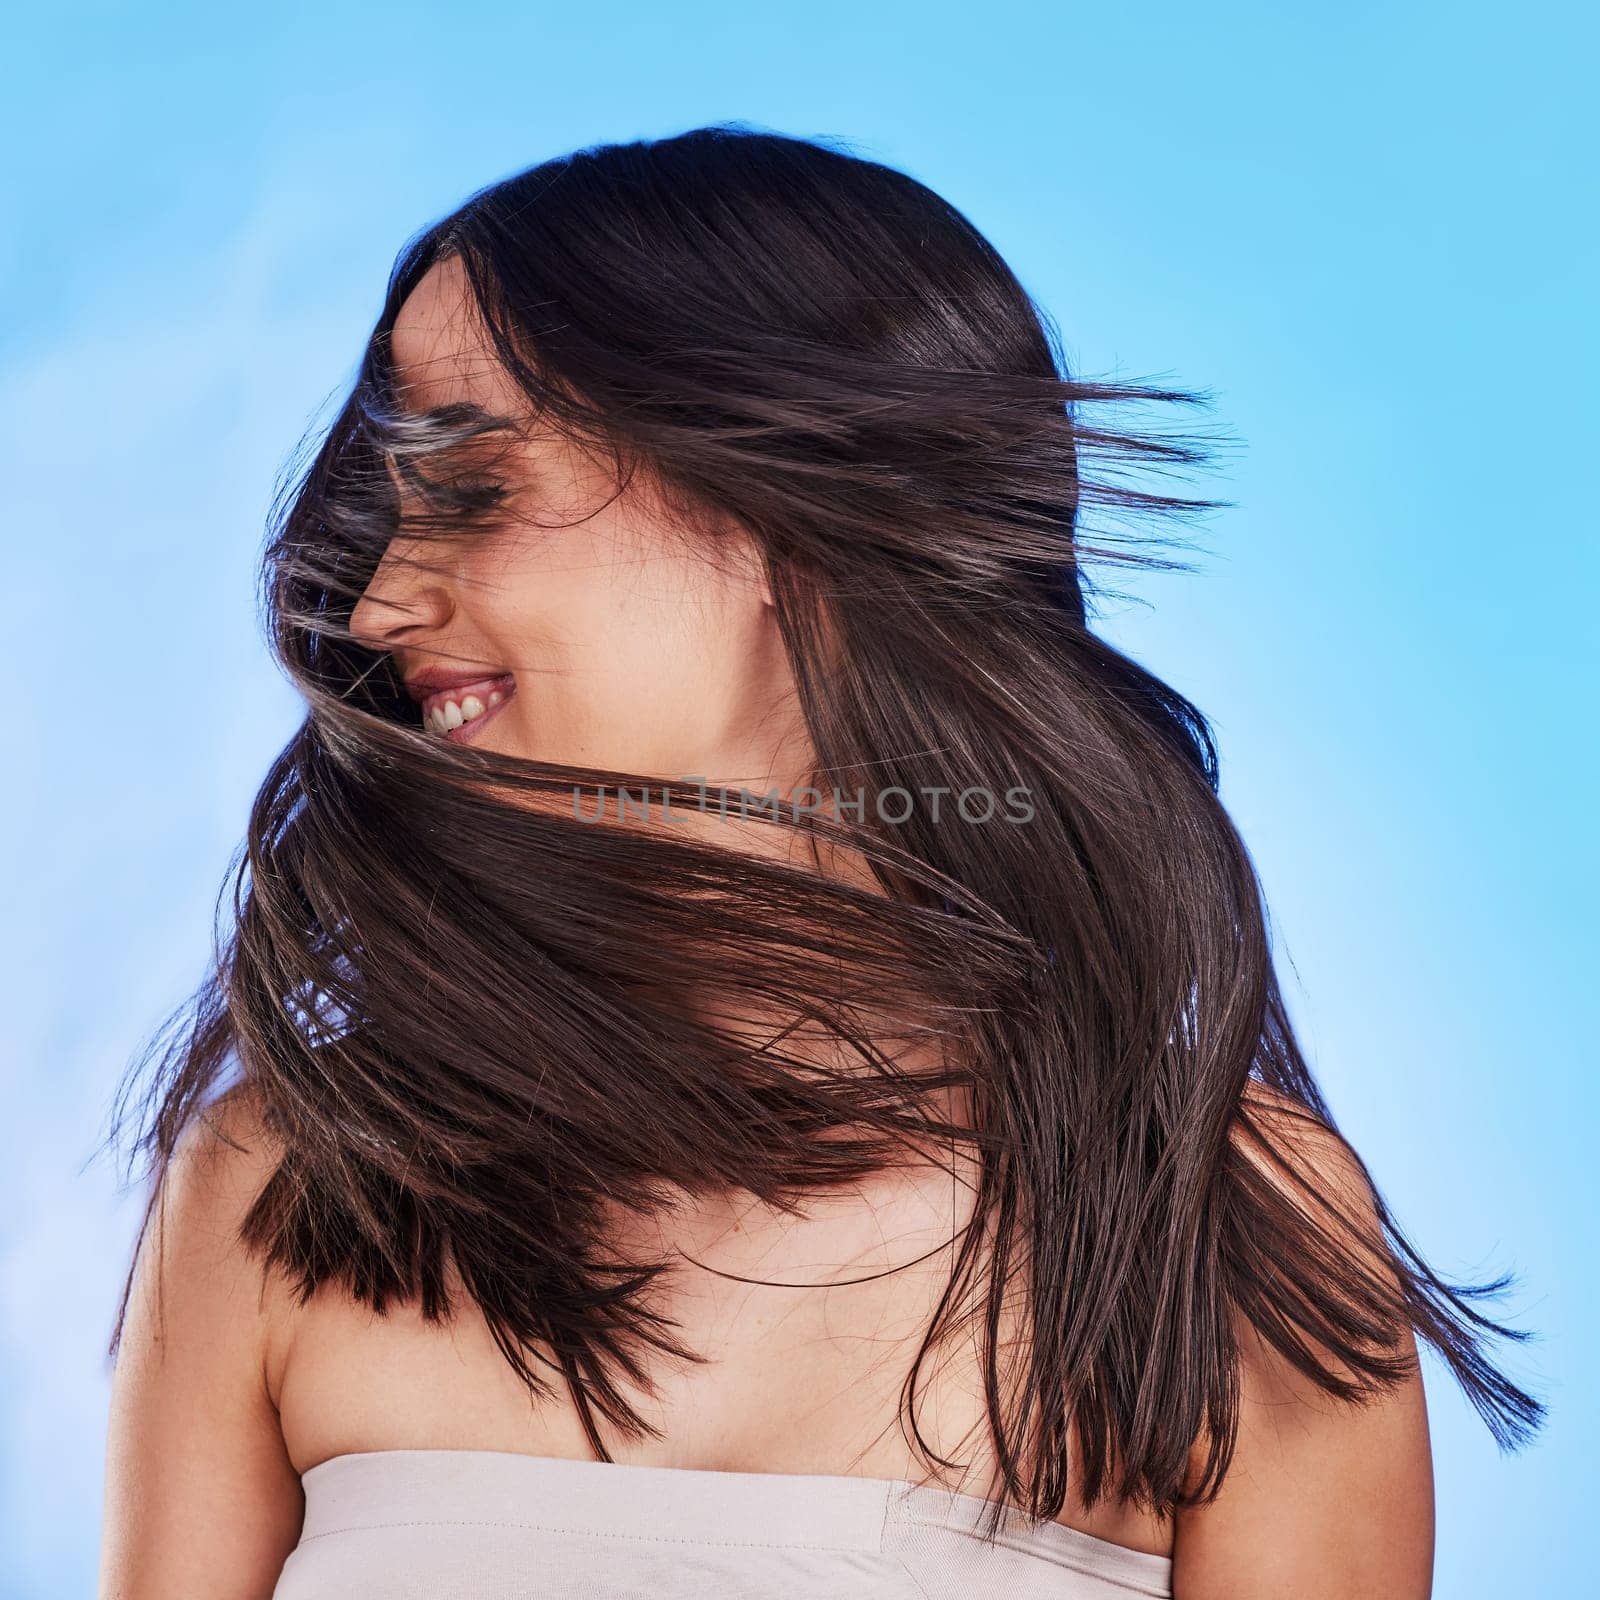 Woman, shake hair and beauty with shine, volume and texture against a blue studio background. Growth, person and model satisfied with salon treatment, glow and change with self care, playful and fun.